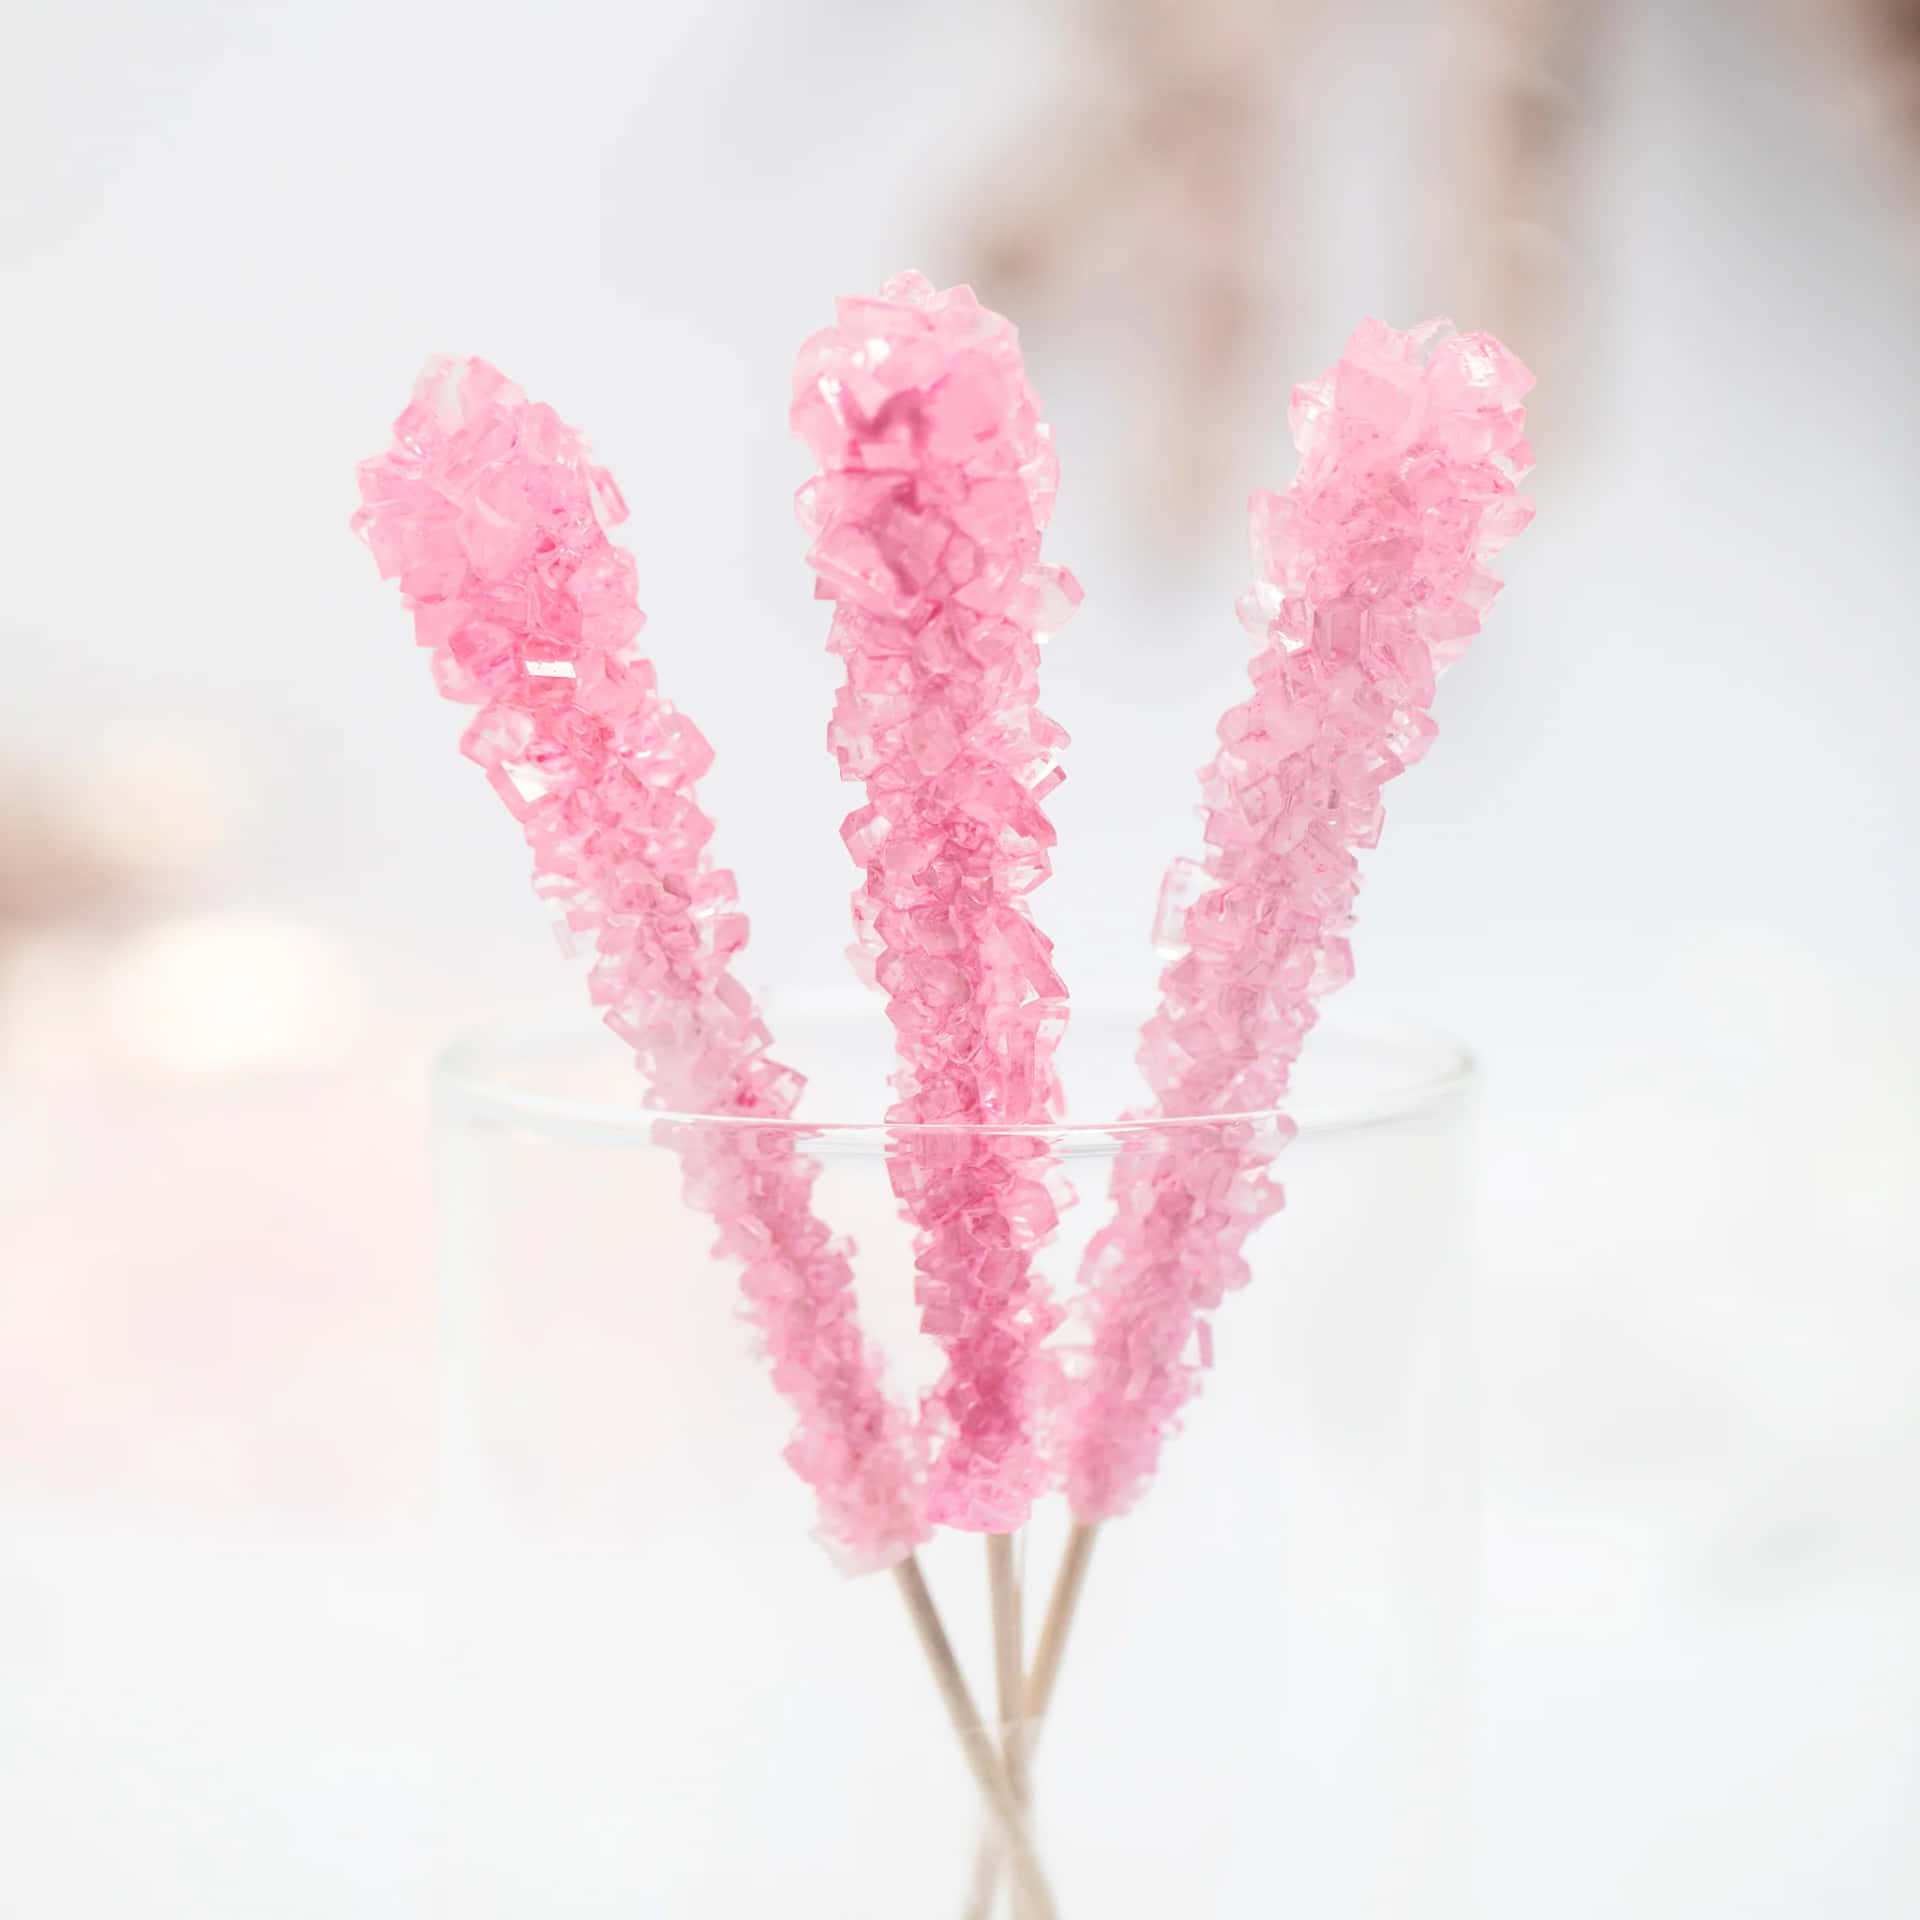 Charming Pink Rock Candy Close-up Wallpaper